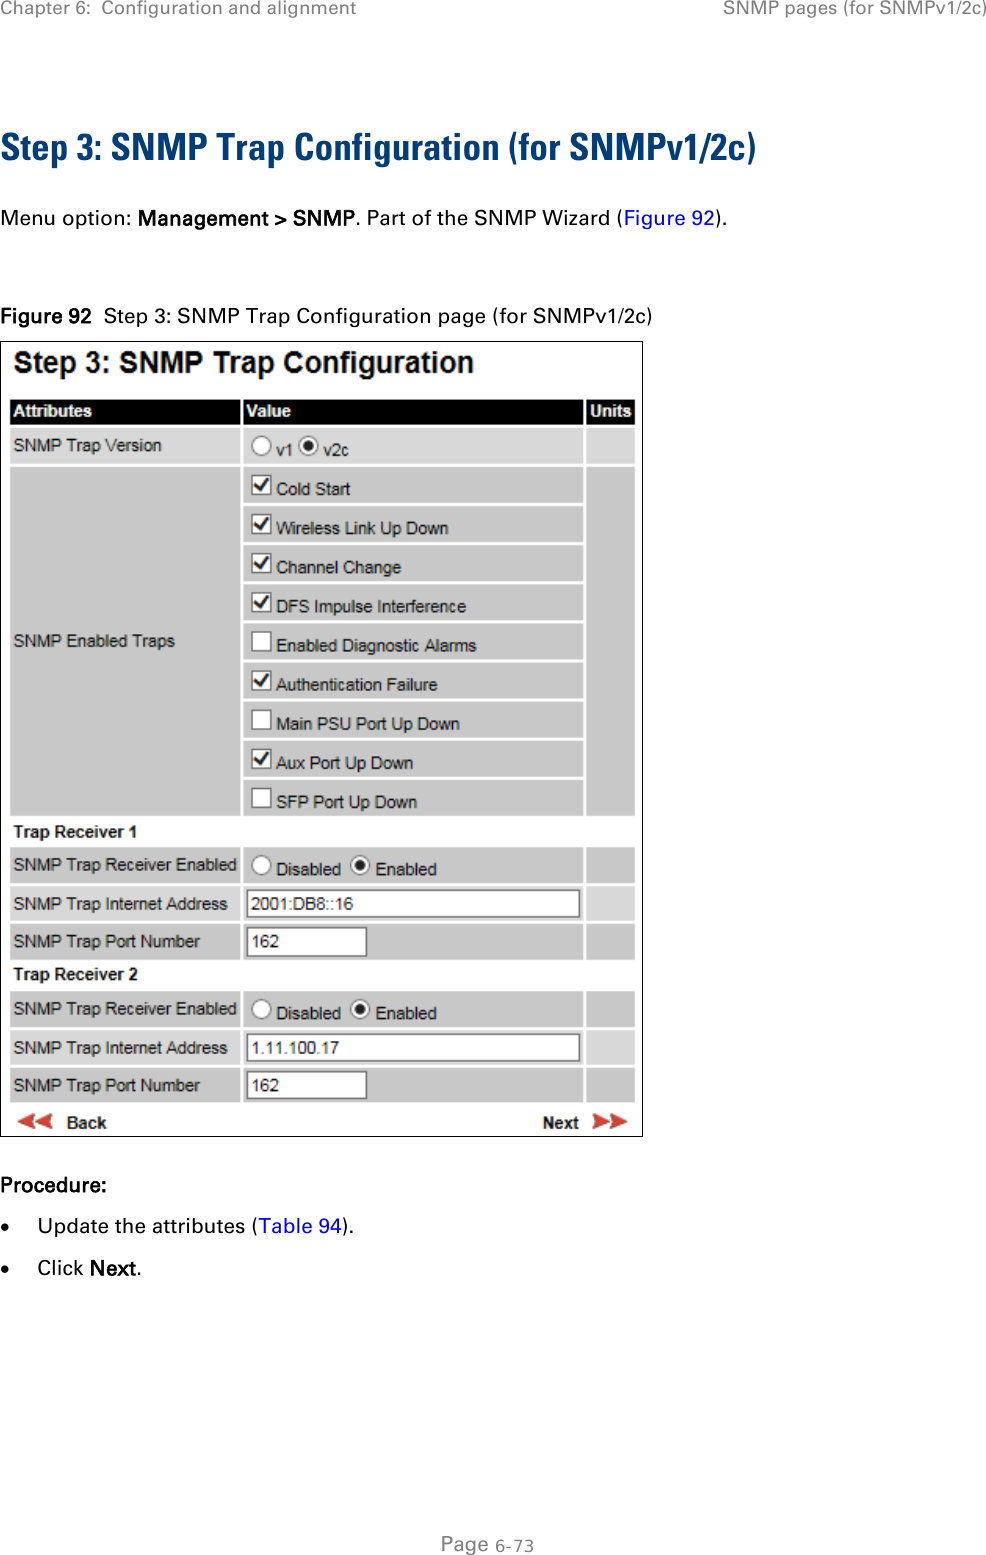 Chapter 6:  Configuration and alignment SNMP pages (for SNMPv1/2c)  Step 3: SNMP Trap Configuration (for SNMPv1/2c) Menu option: Management &gt; SNMP. Part of the SNMP Wizard (Figure 92).  Figure 92  Step 3: SNMP Trap Configuration page (for SNMPv1/2c)  Procedure: • Update the attributes (Table 94). • Click Next.   Page 6-73 